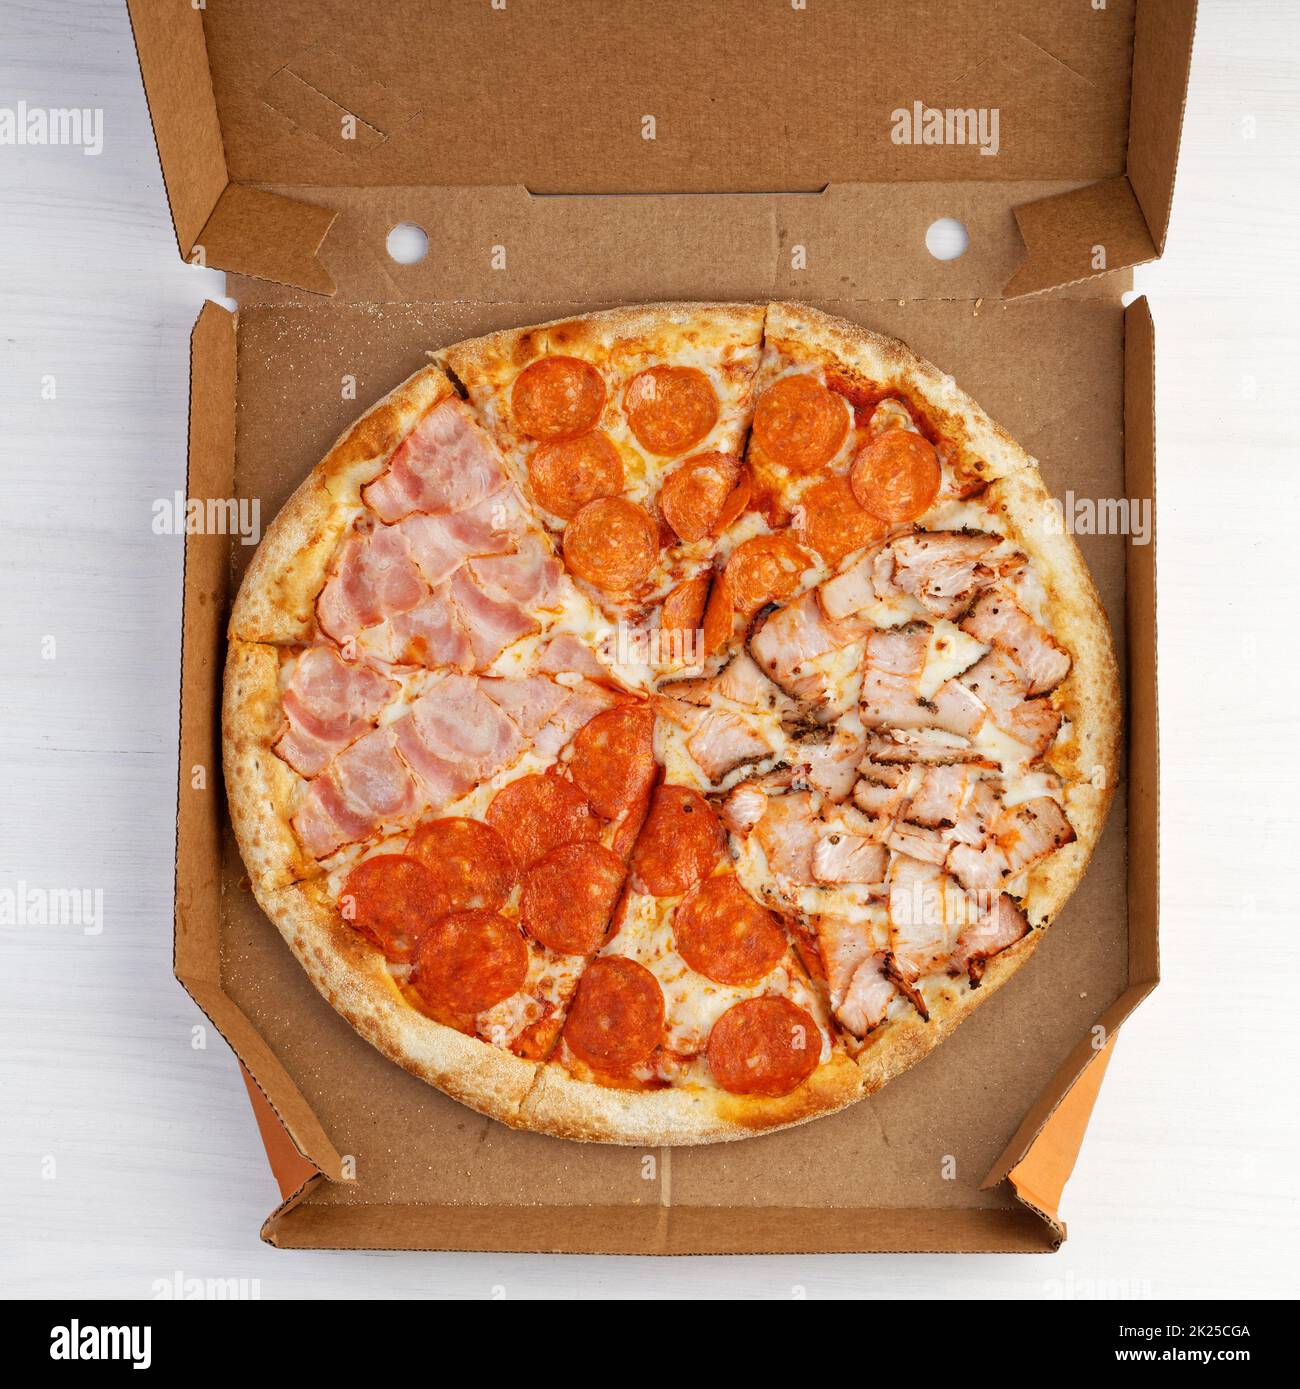 Assorted pizza with pepperoni, turkey meat and bacon in opened box. Top view. Stock Photo